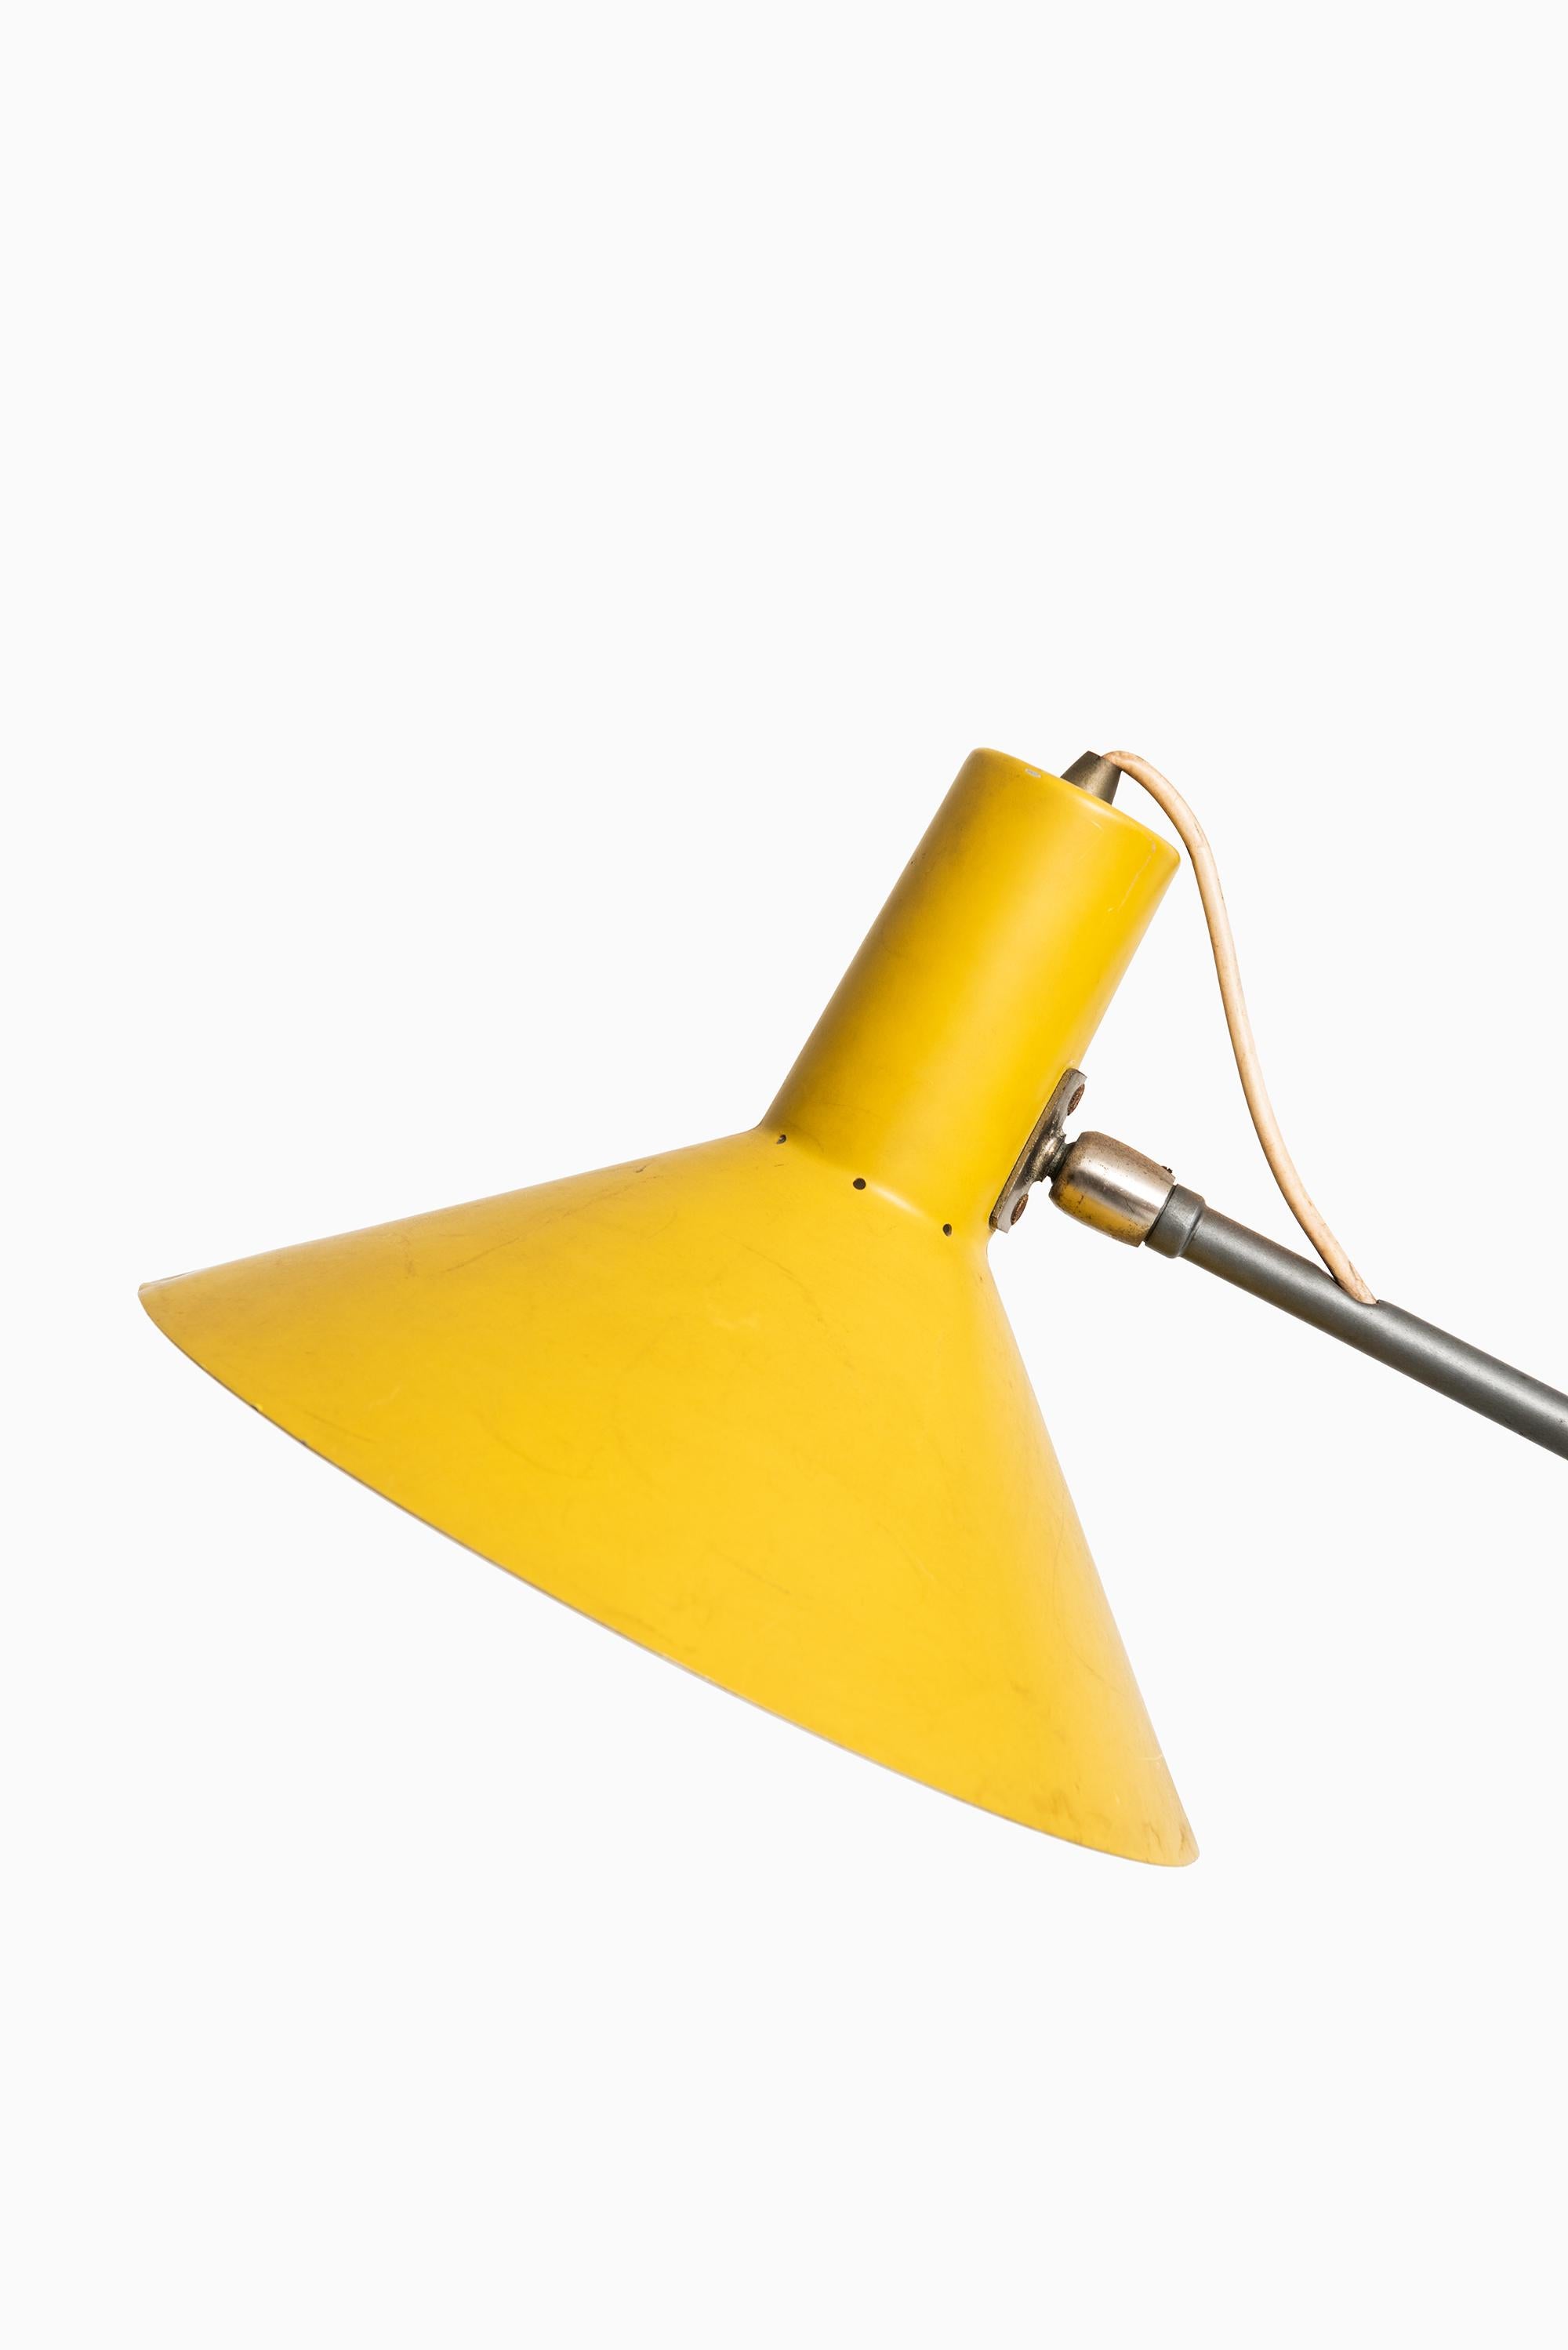 Mid-Century Modern Floor Lamp Attributed to Wim Rietveld and Gispen in Netherlands For Sale